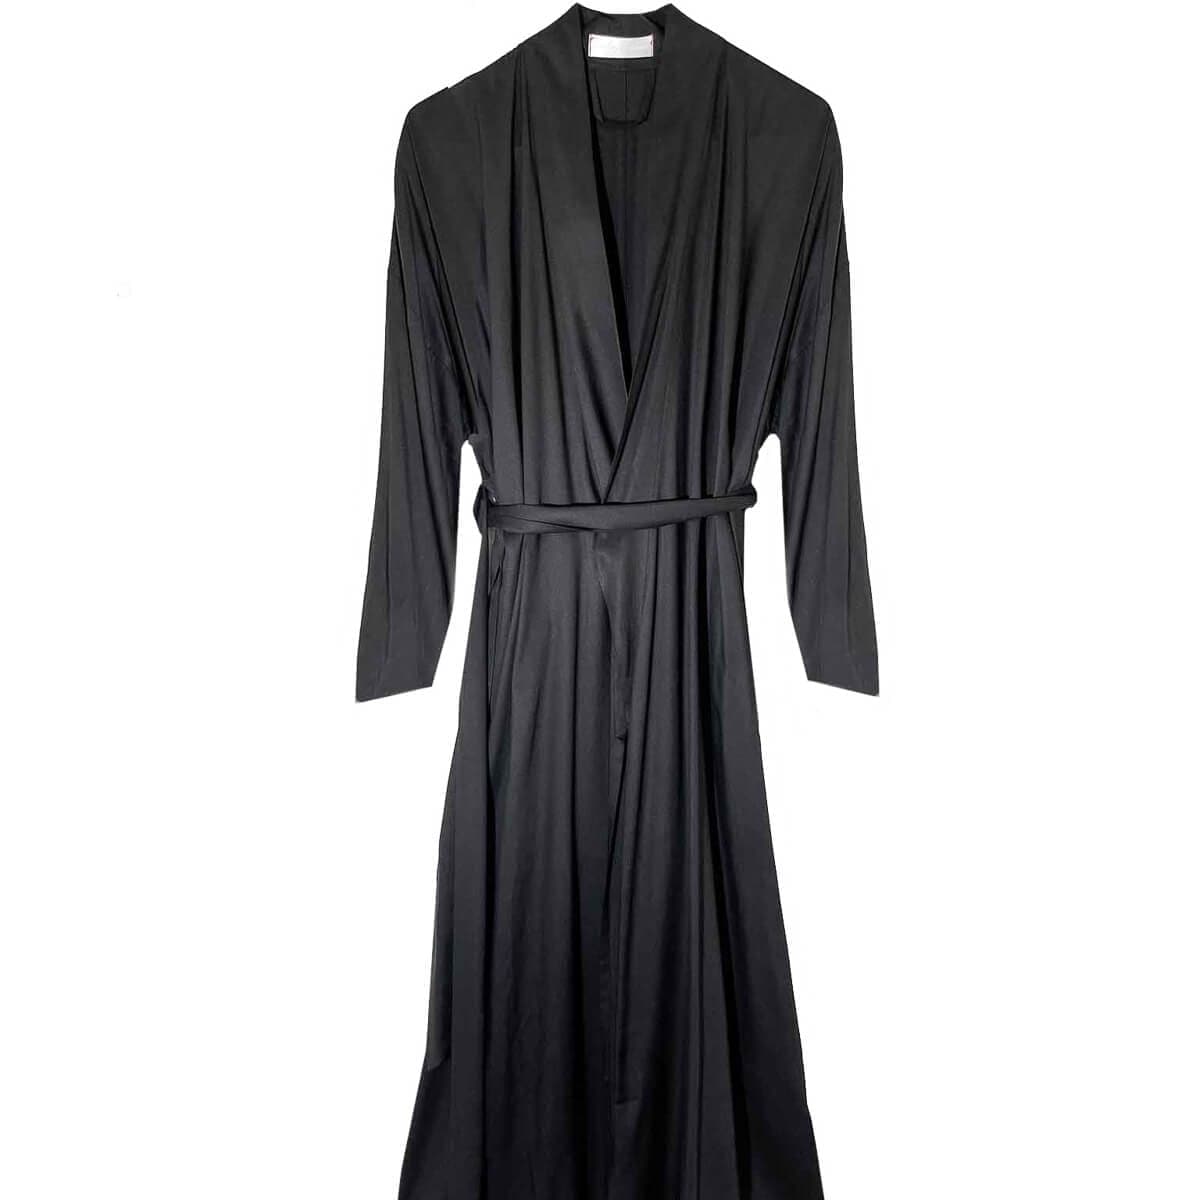 Sunday Forever Robes The Classic Black Cooper Robe